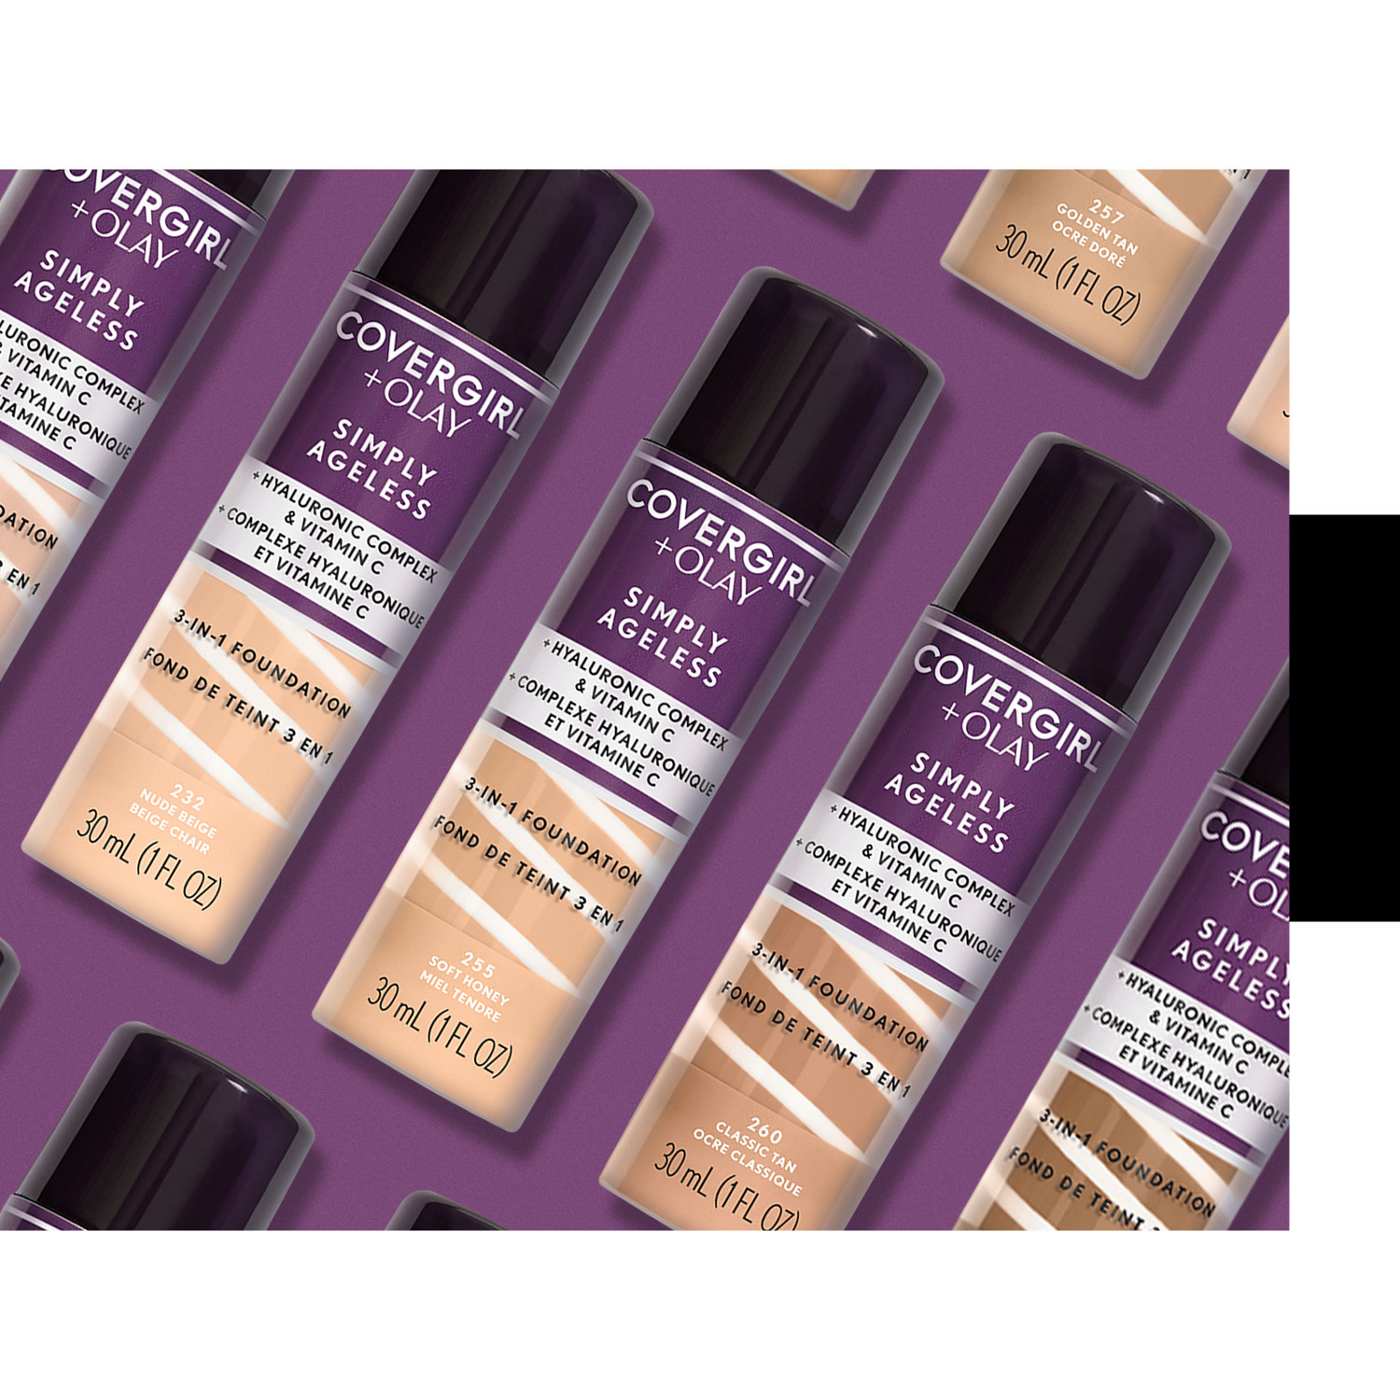 Covergirl Simply Ageless 3-in-1 Liquid Foundation 220 Creamy Natural; image 5 of 6